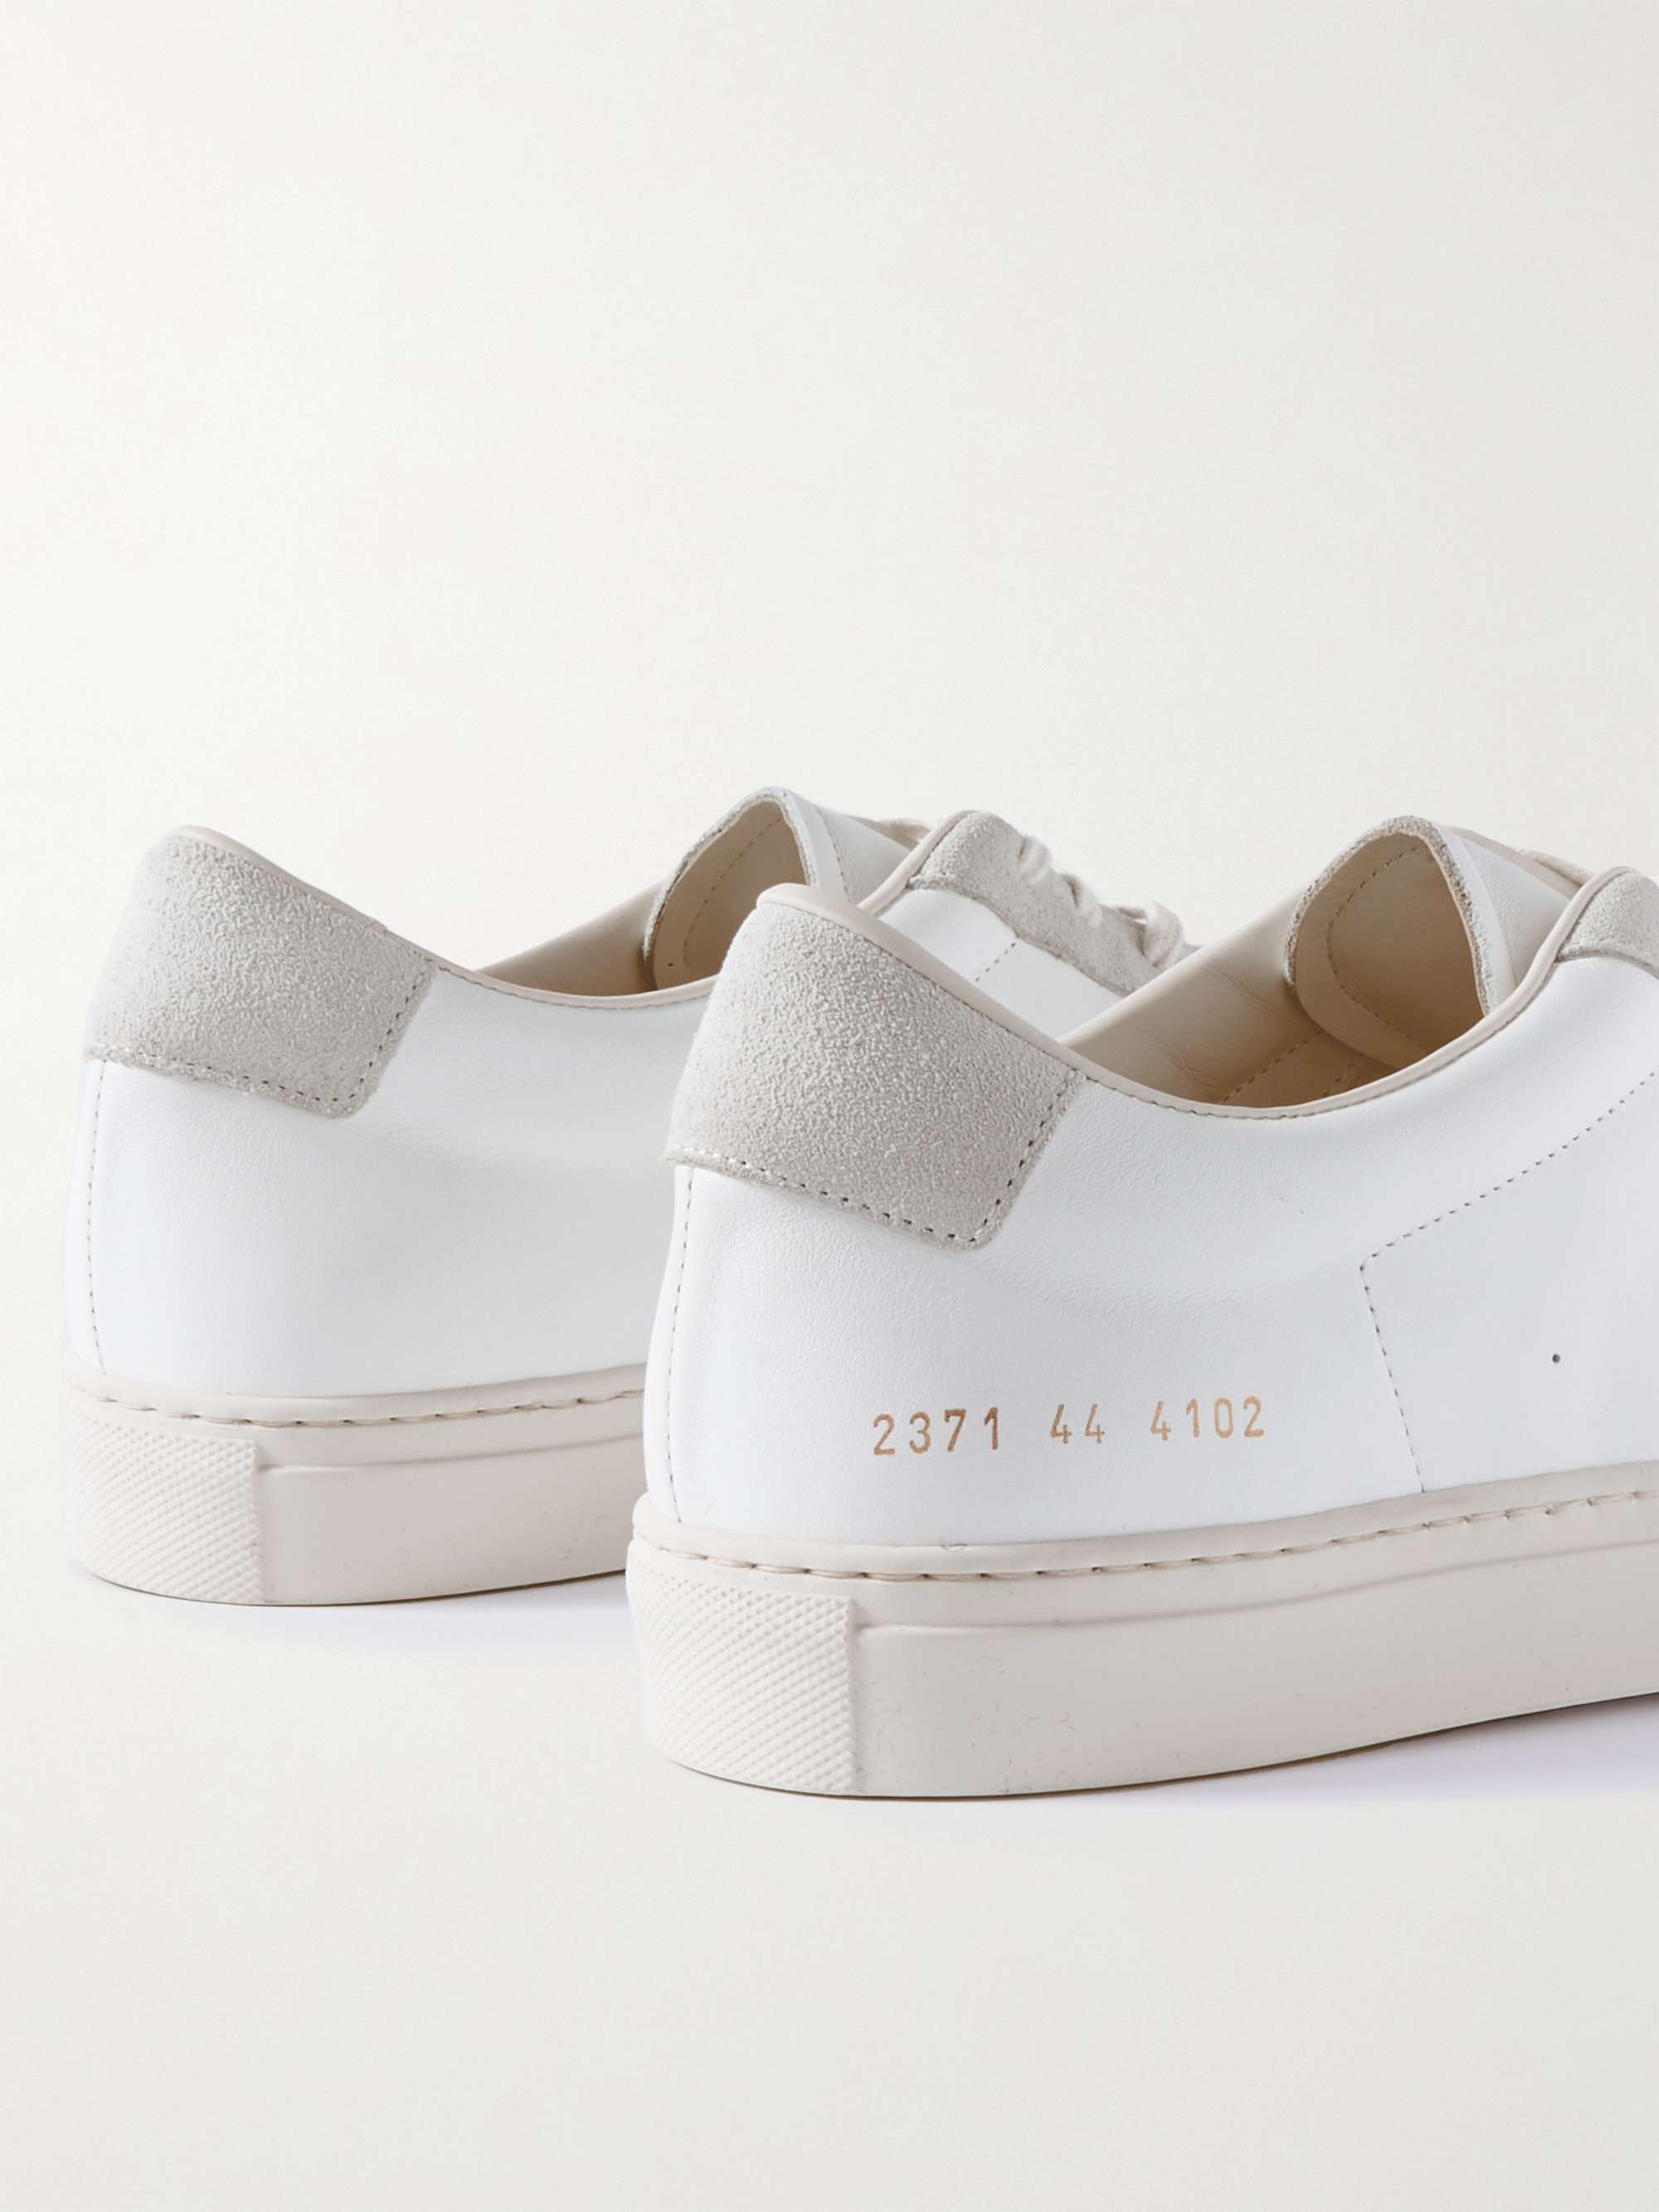 COMMON PROJECTS Bball Suede-Trimmed Leather Sneakers